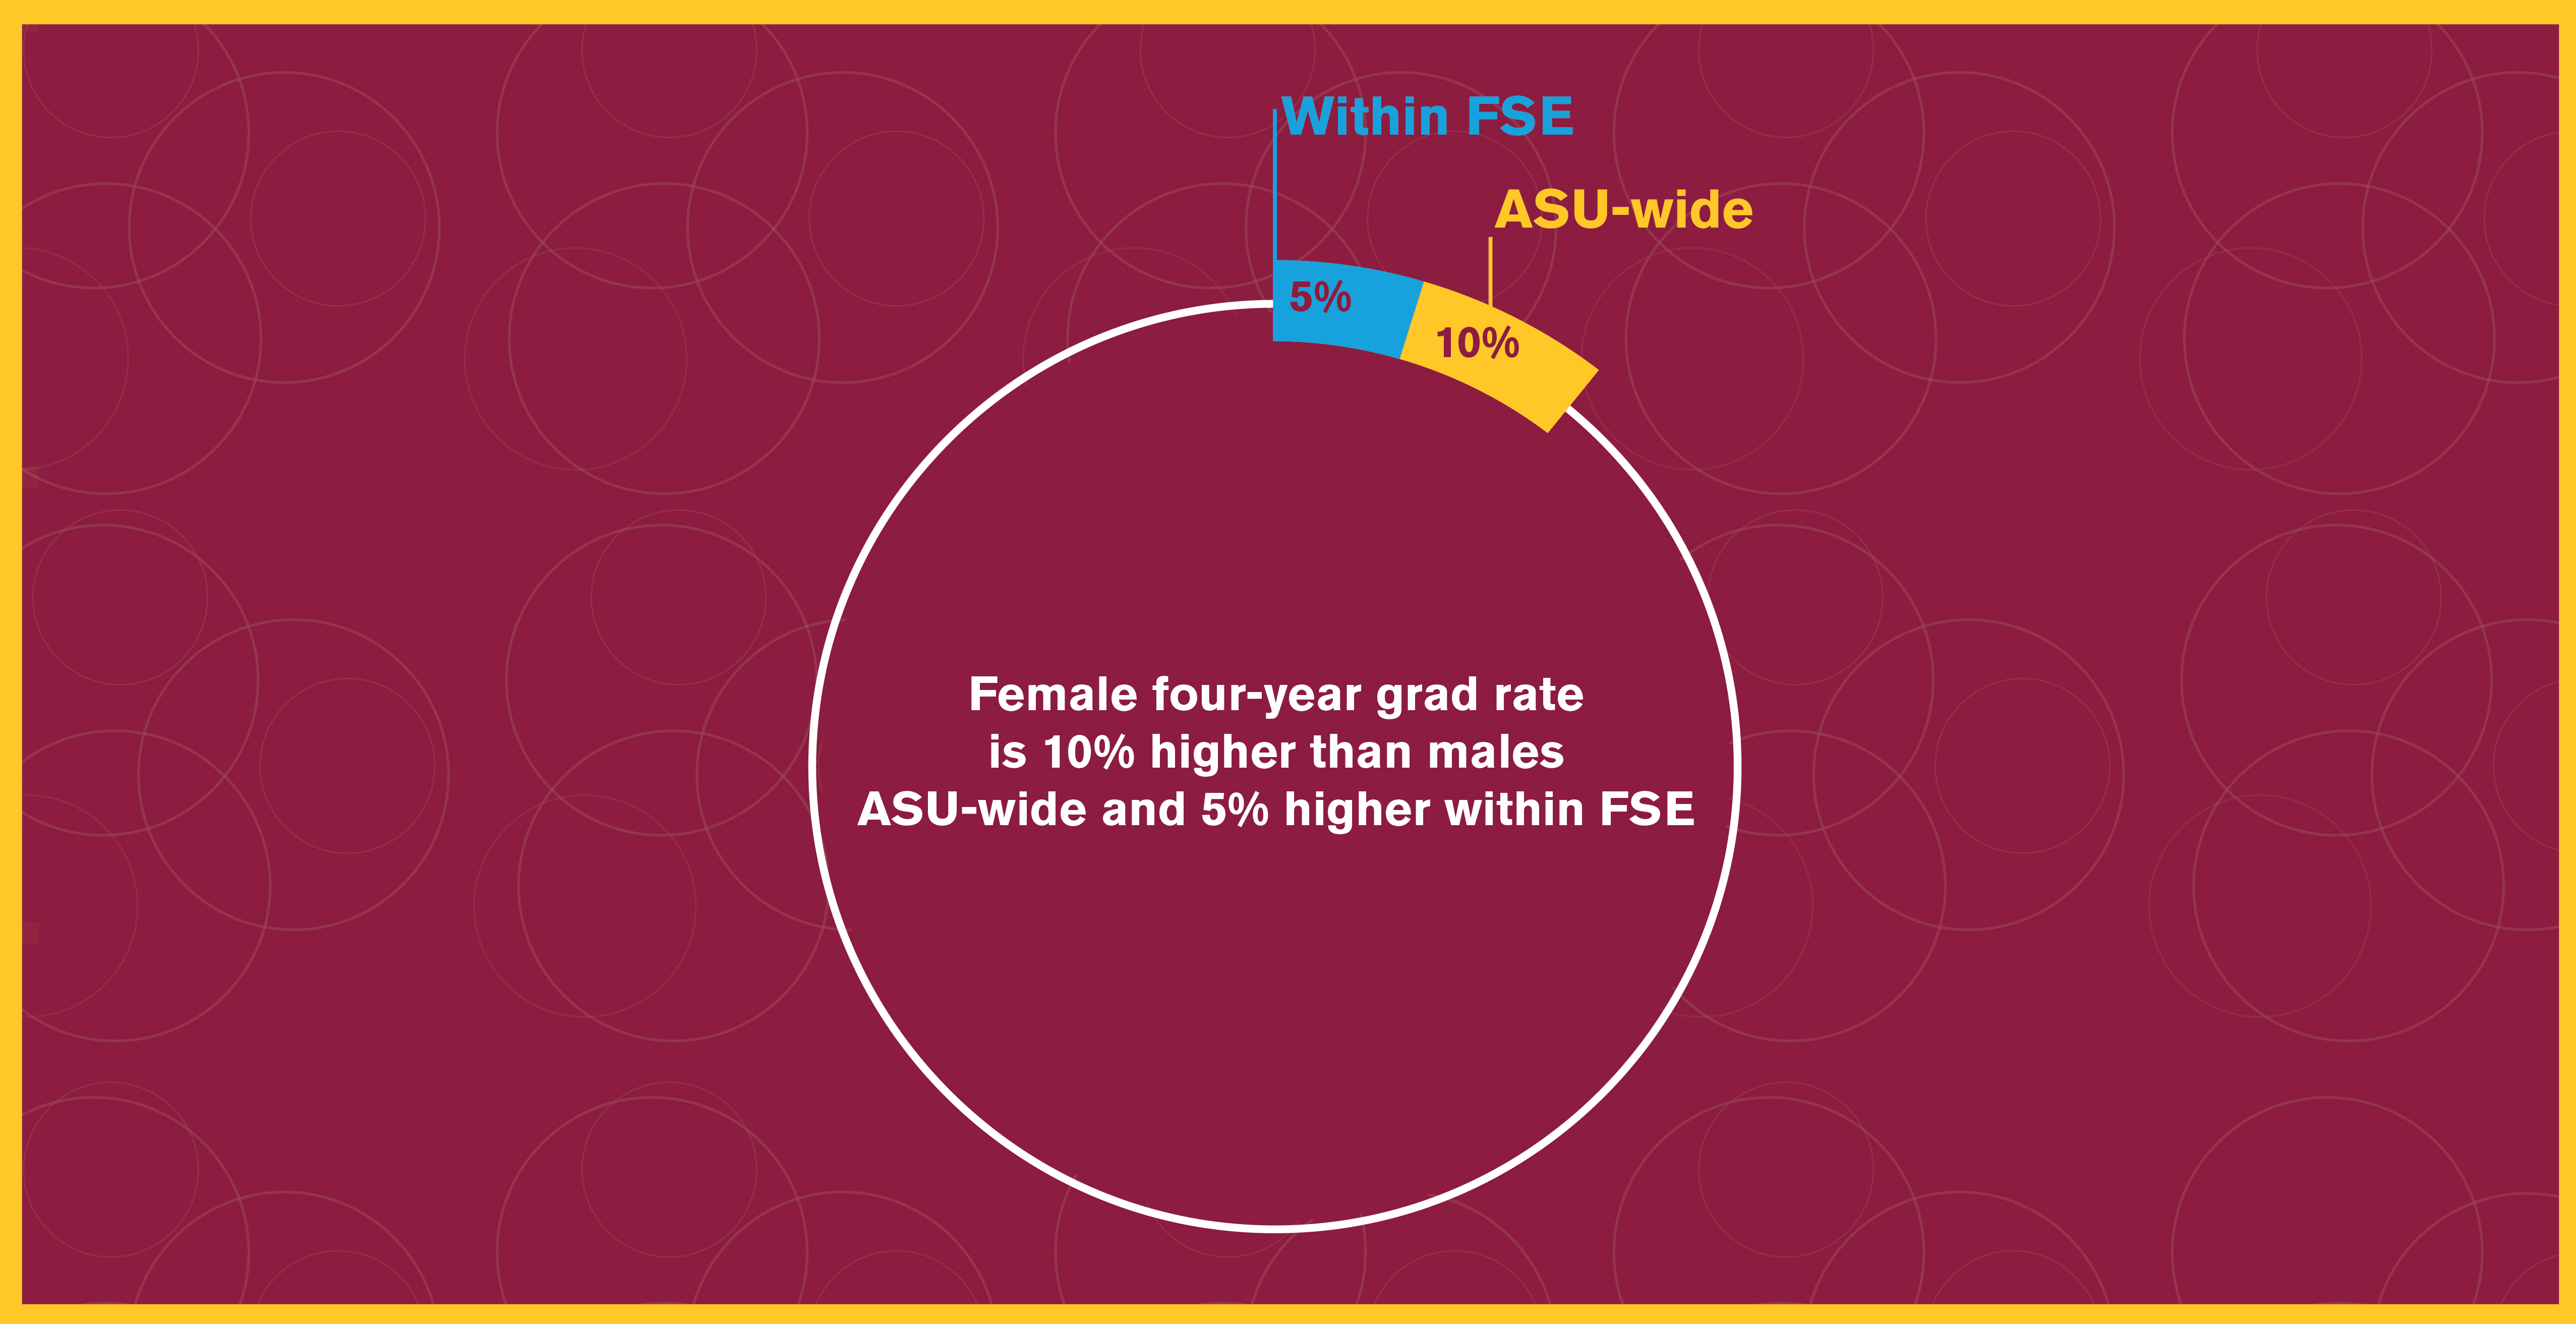 Female four-year grad rate is 10% higher than males ASU-wide and 5% higher within the Fulton Schools